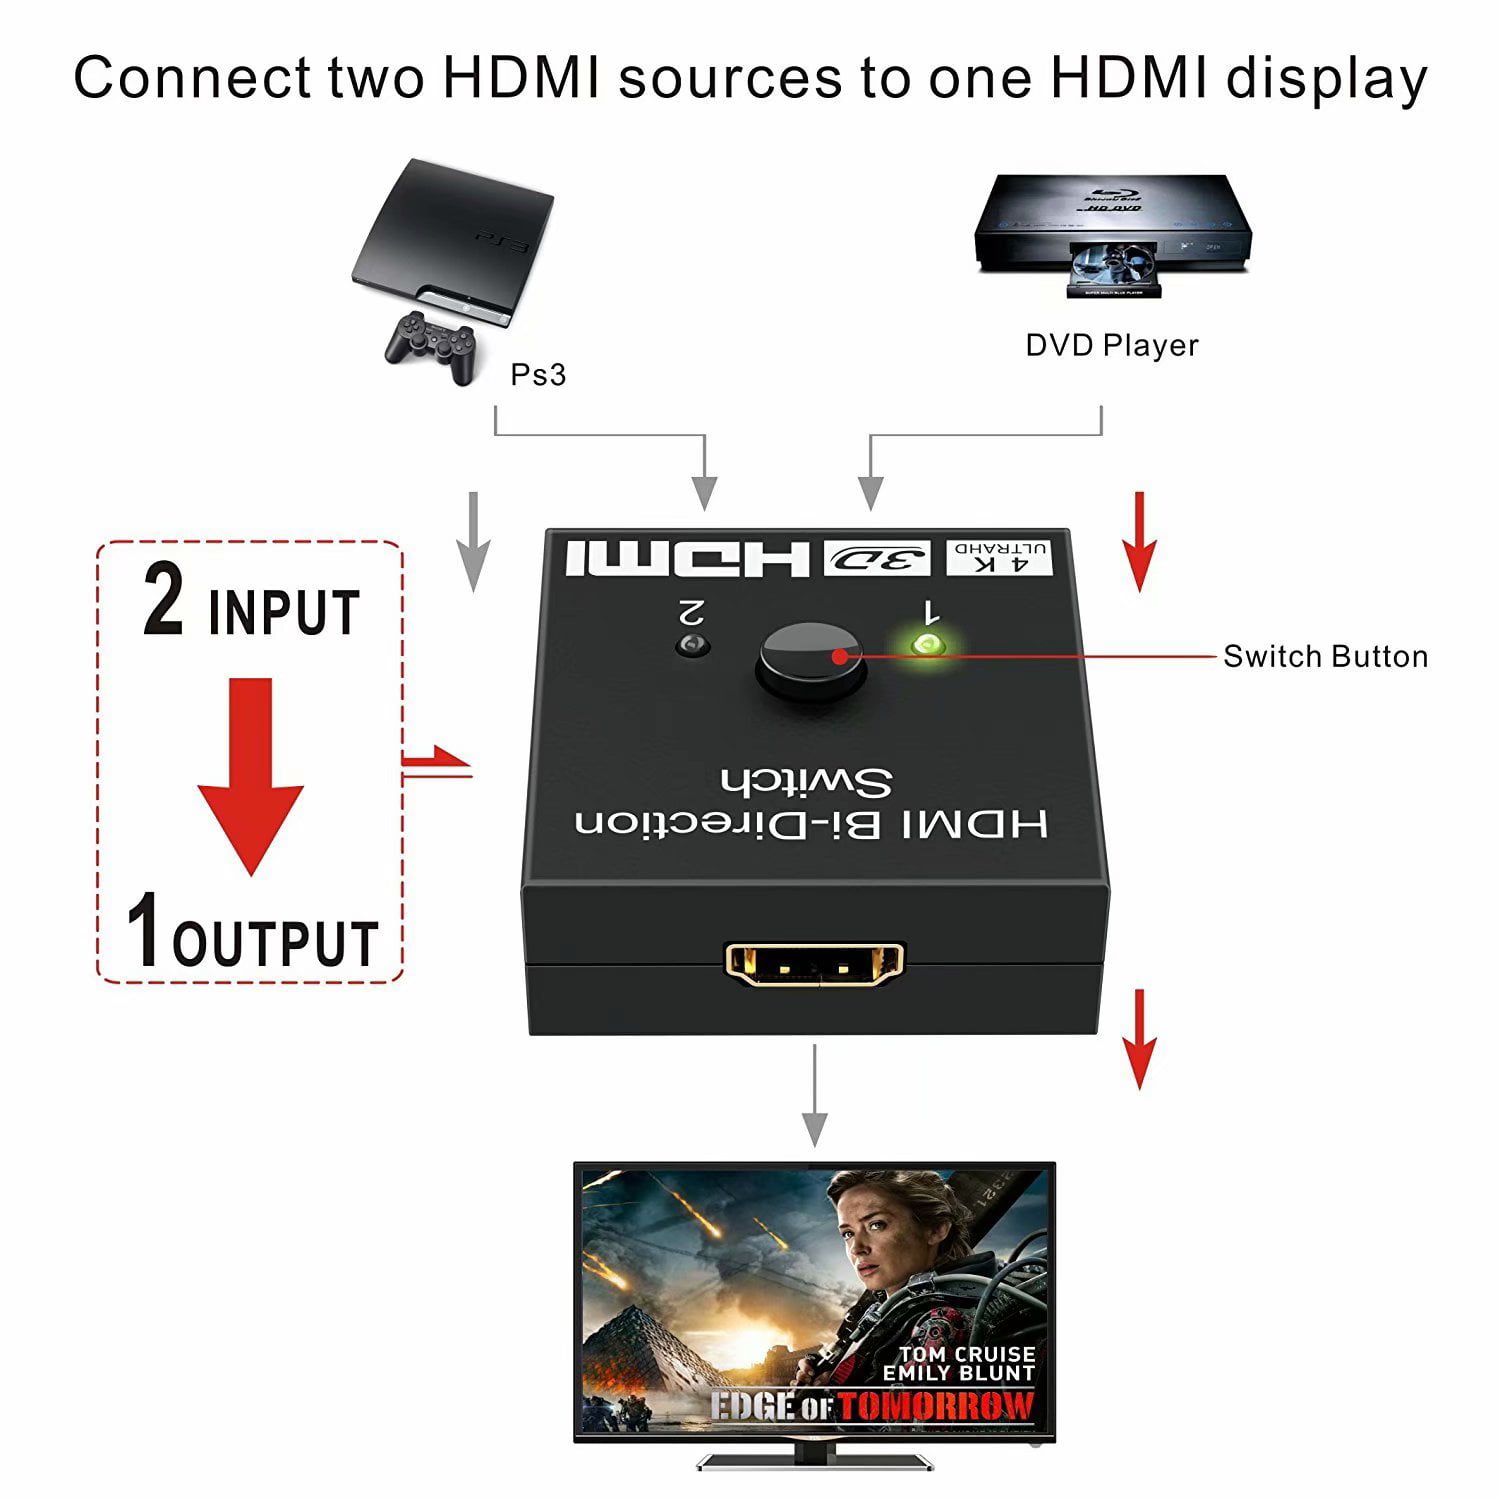 HDMI-Compatible Switch Bi-Direction 4K HDMI-Compatible 2 x 1/1 x 2 No External Power Required 2 Ports HDMI-Compatible Switcher Supports HD 4K 3D 1080P for Xbox Fire Stick Roku -